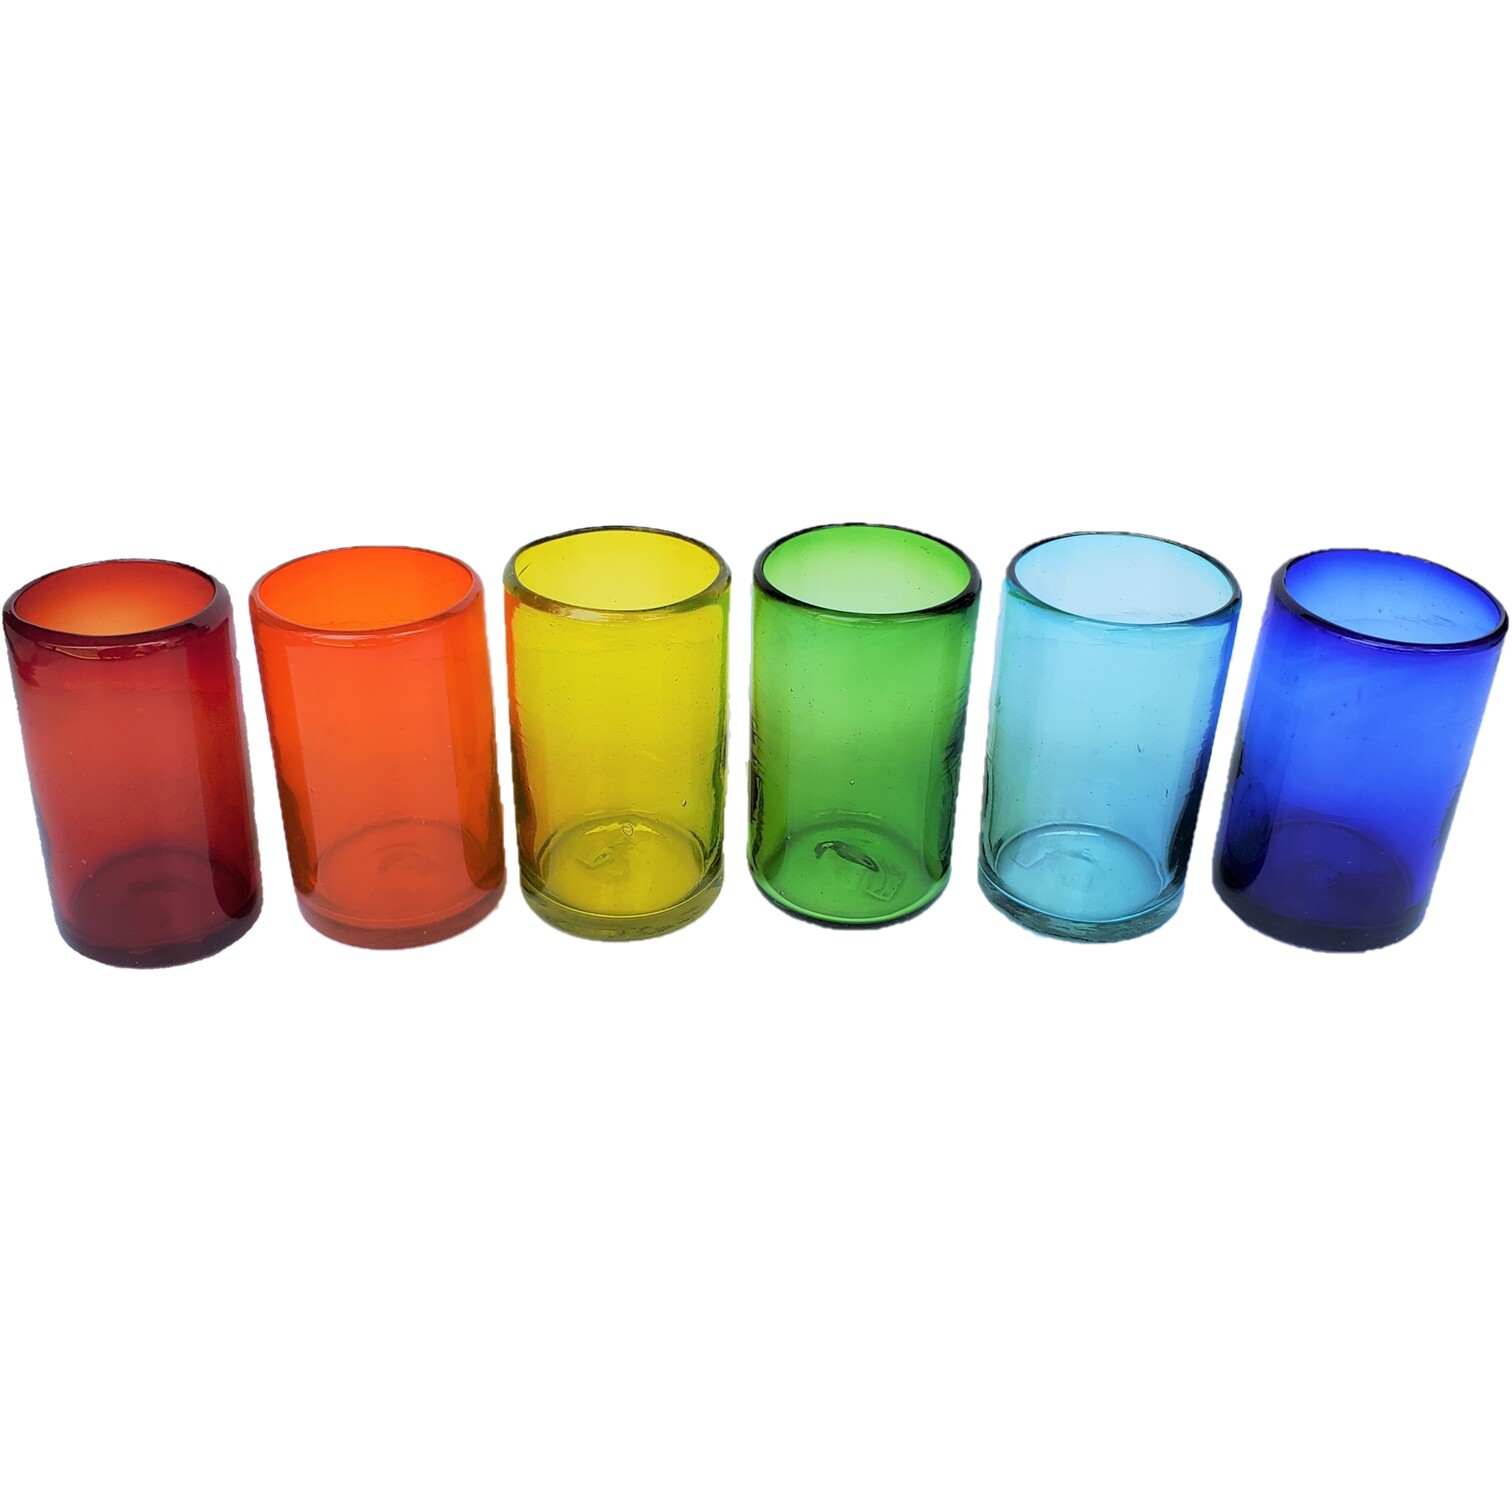 Mexican Glasses / Rainbow Colored drinking glasses (set of 6) / These handcrafted glasses deliver a classic touch to your favorite drink.